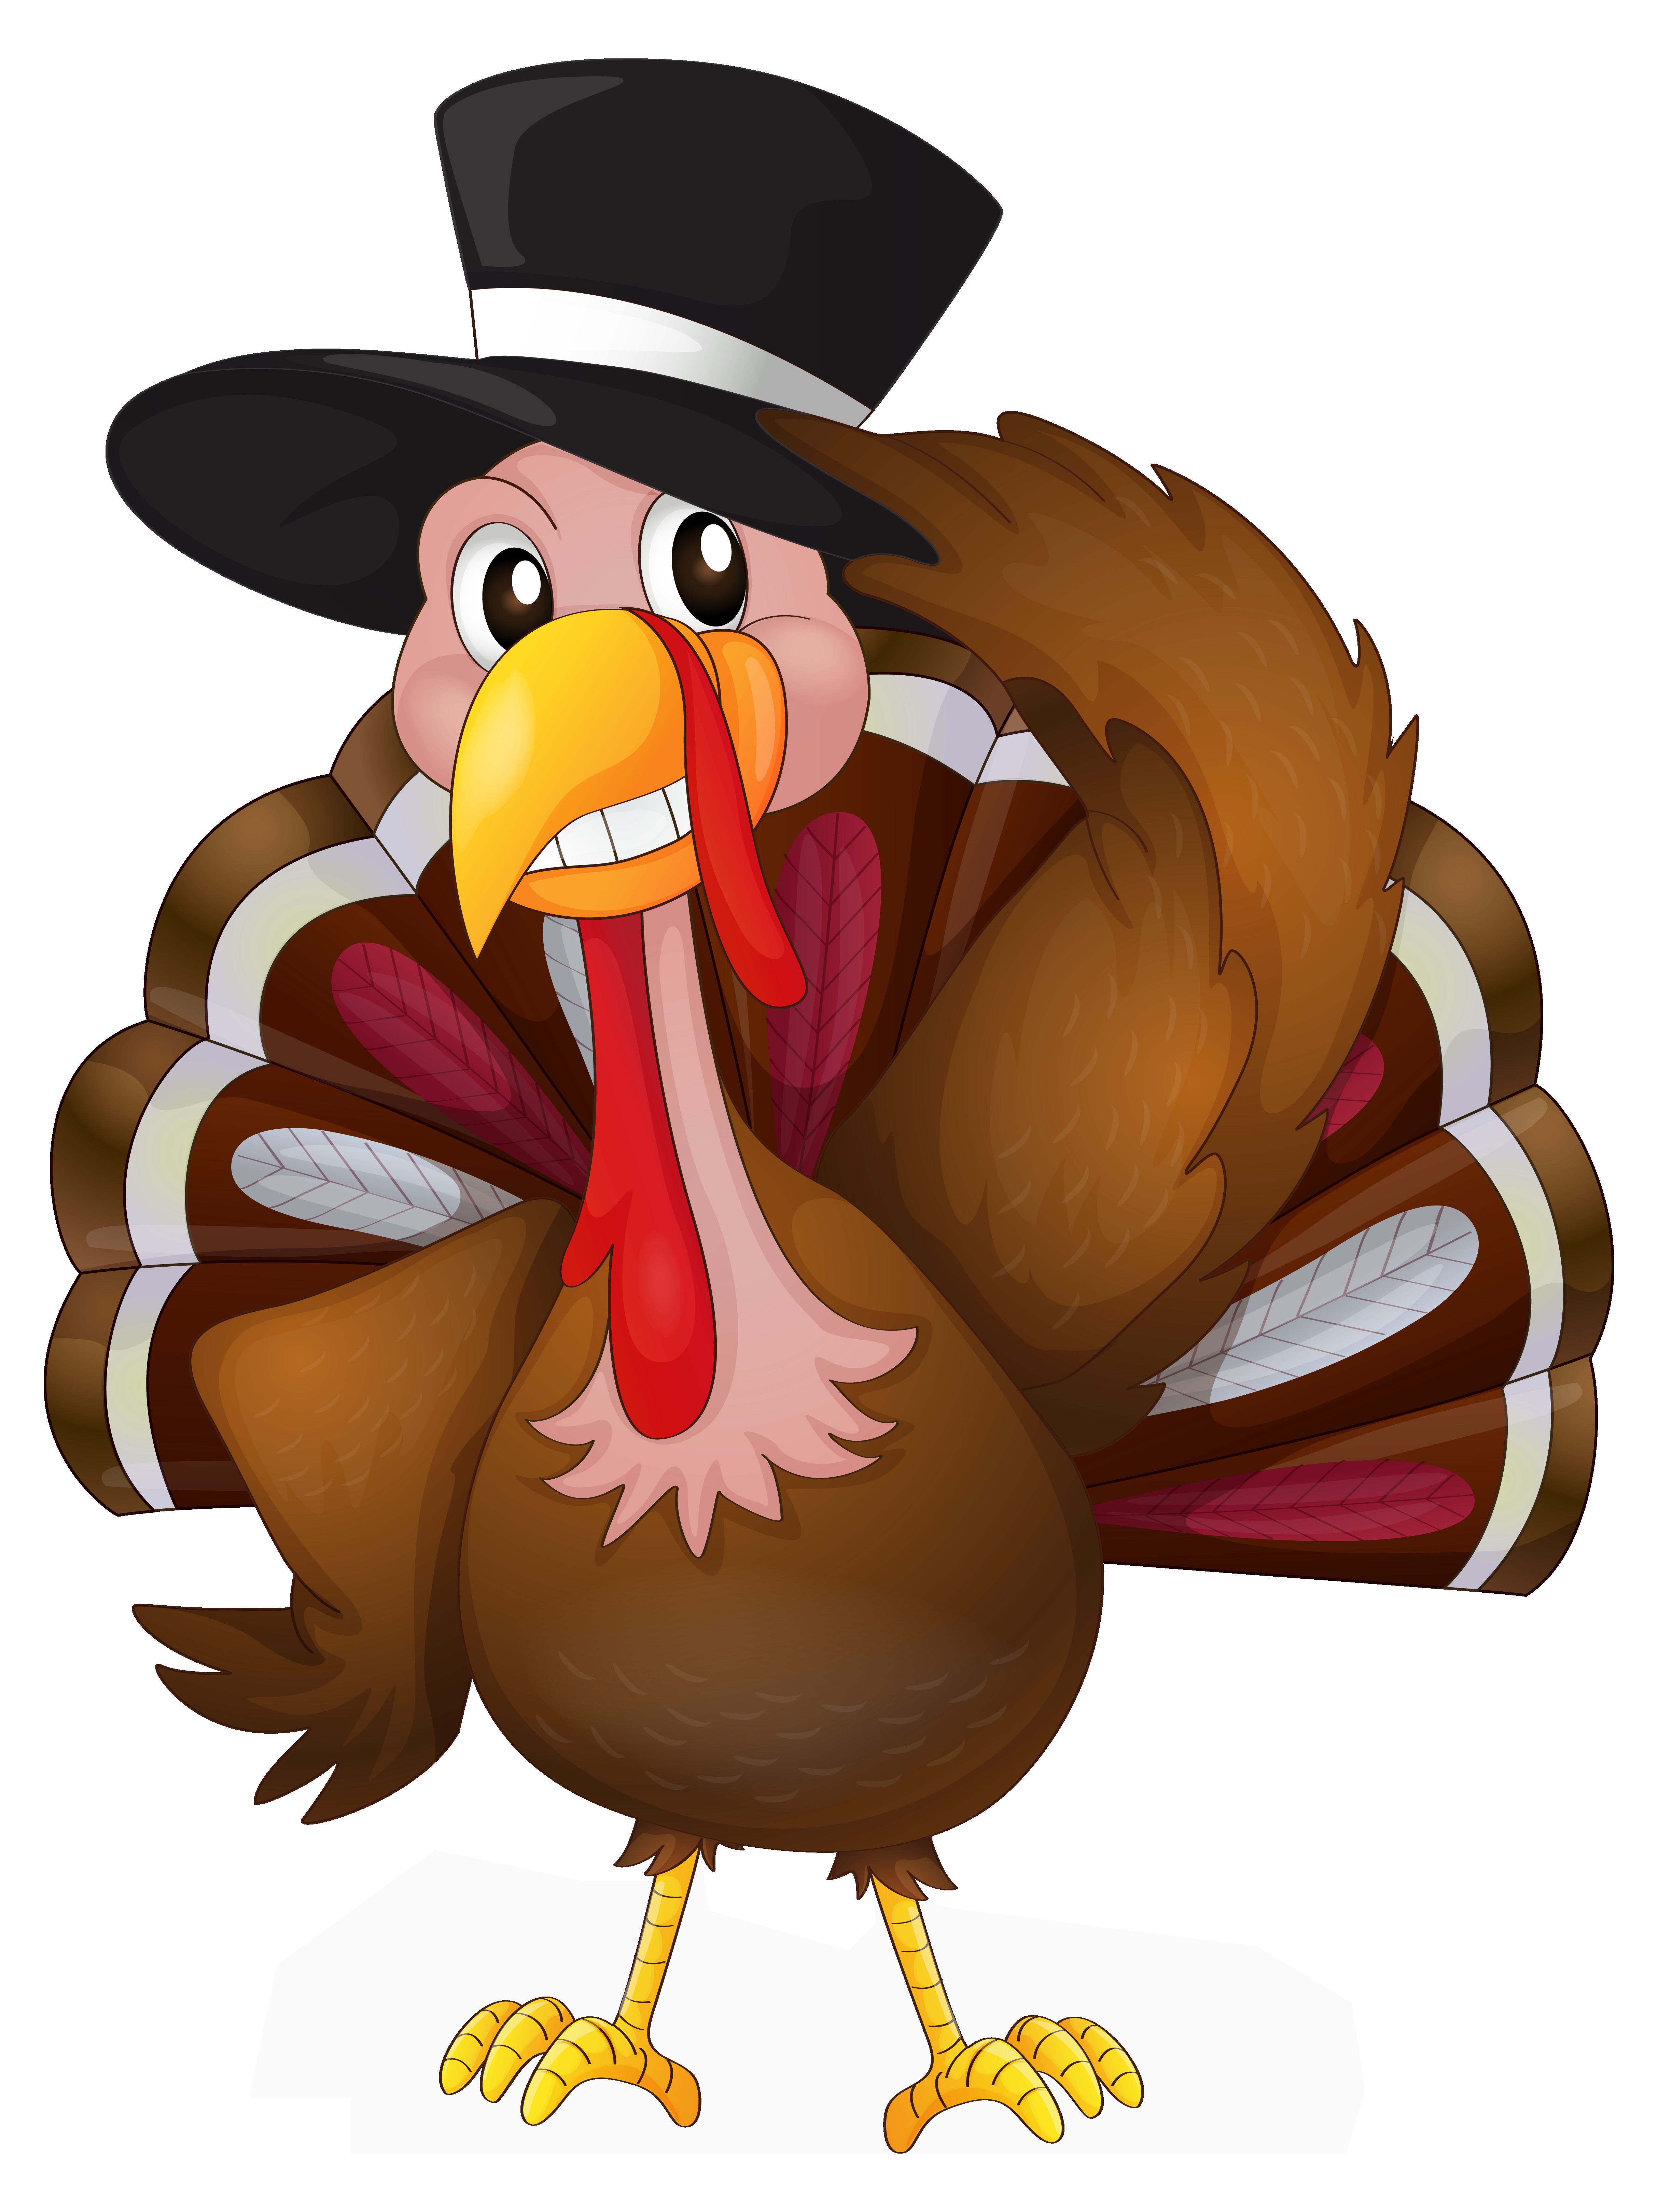 Turkey Images For Thanksgiving
 Turkey clipart png transparent Pencil and in color